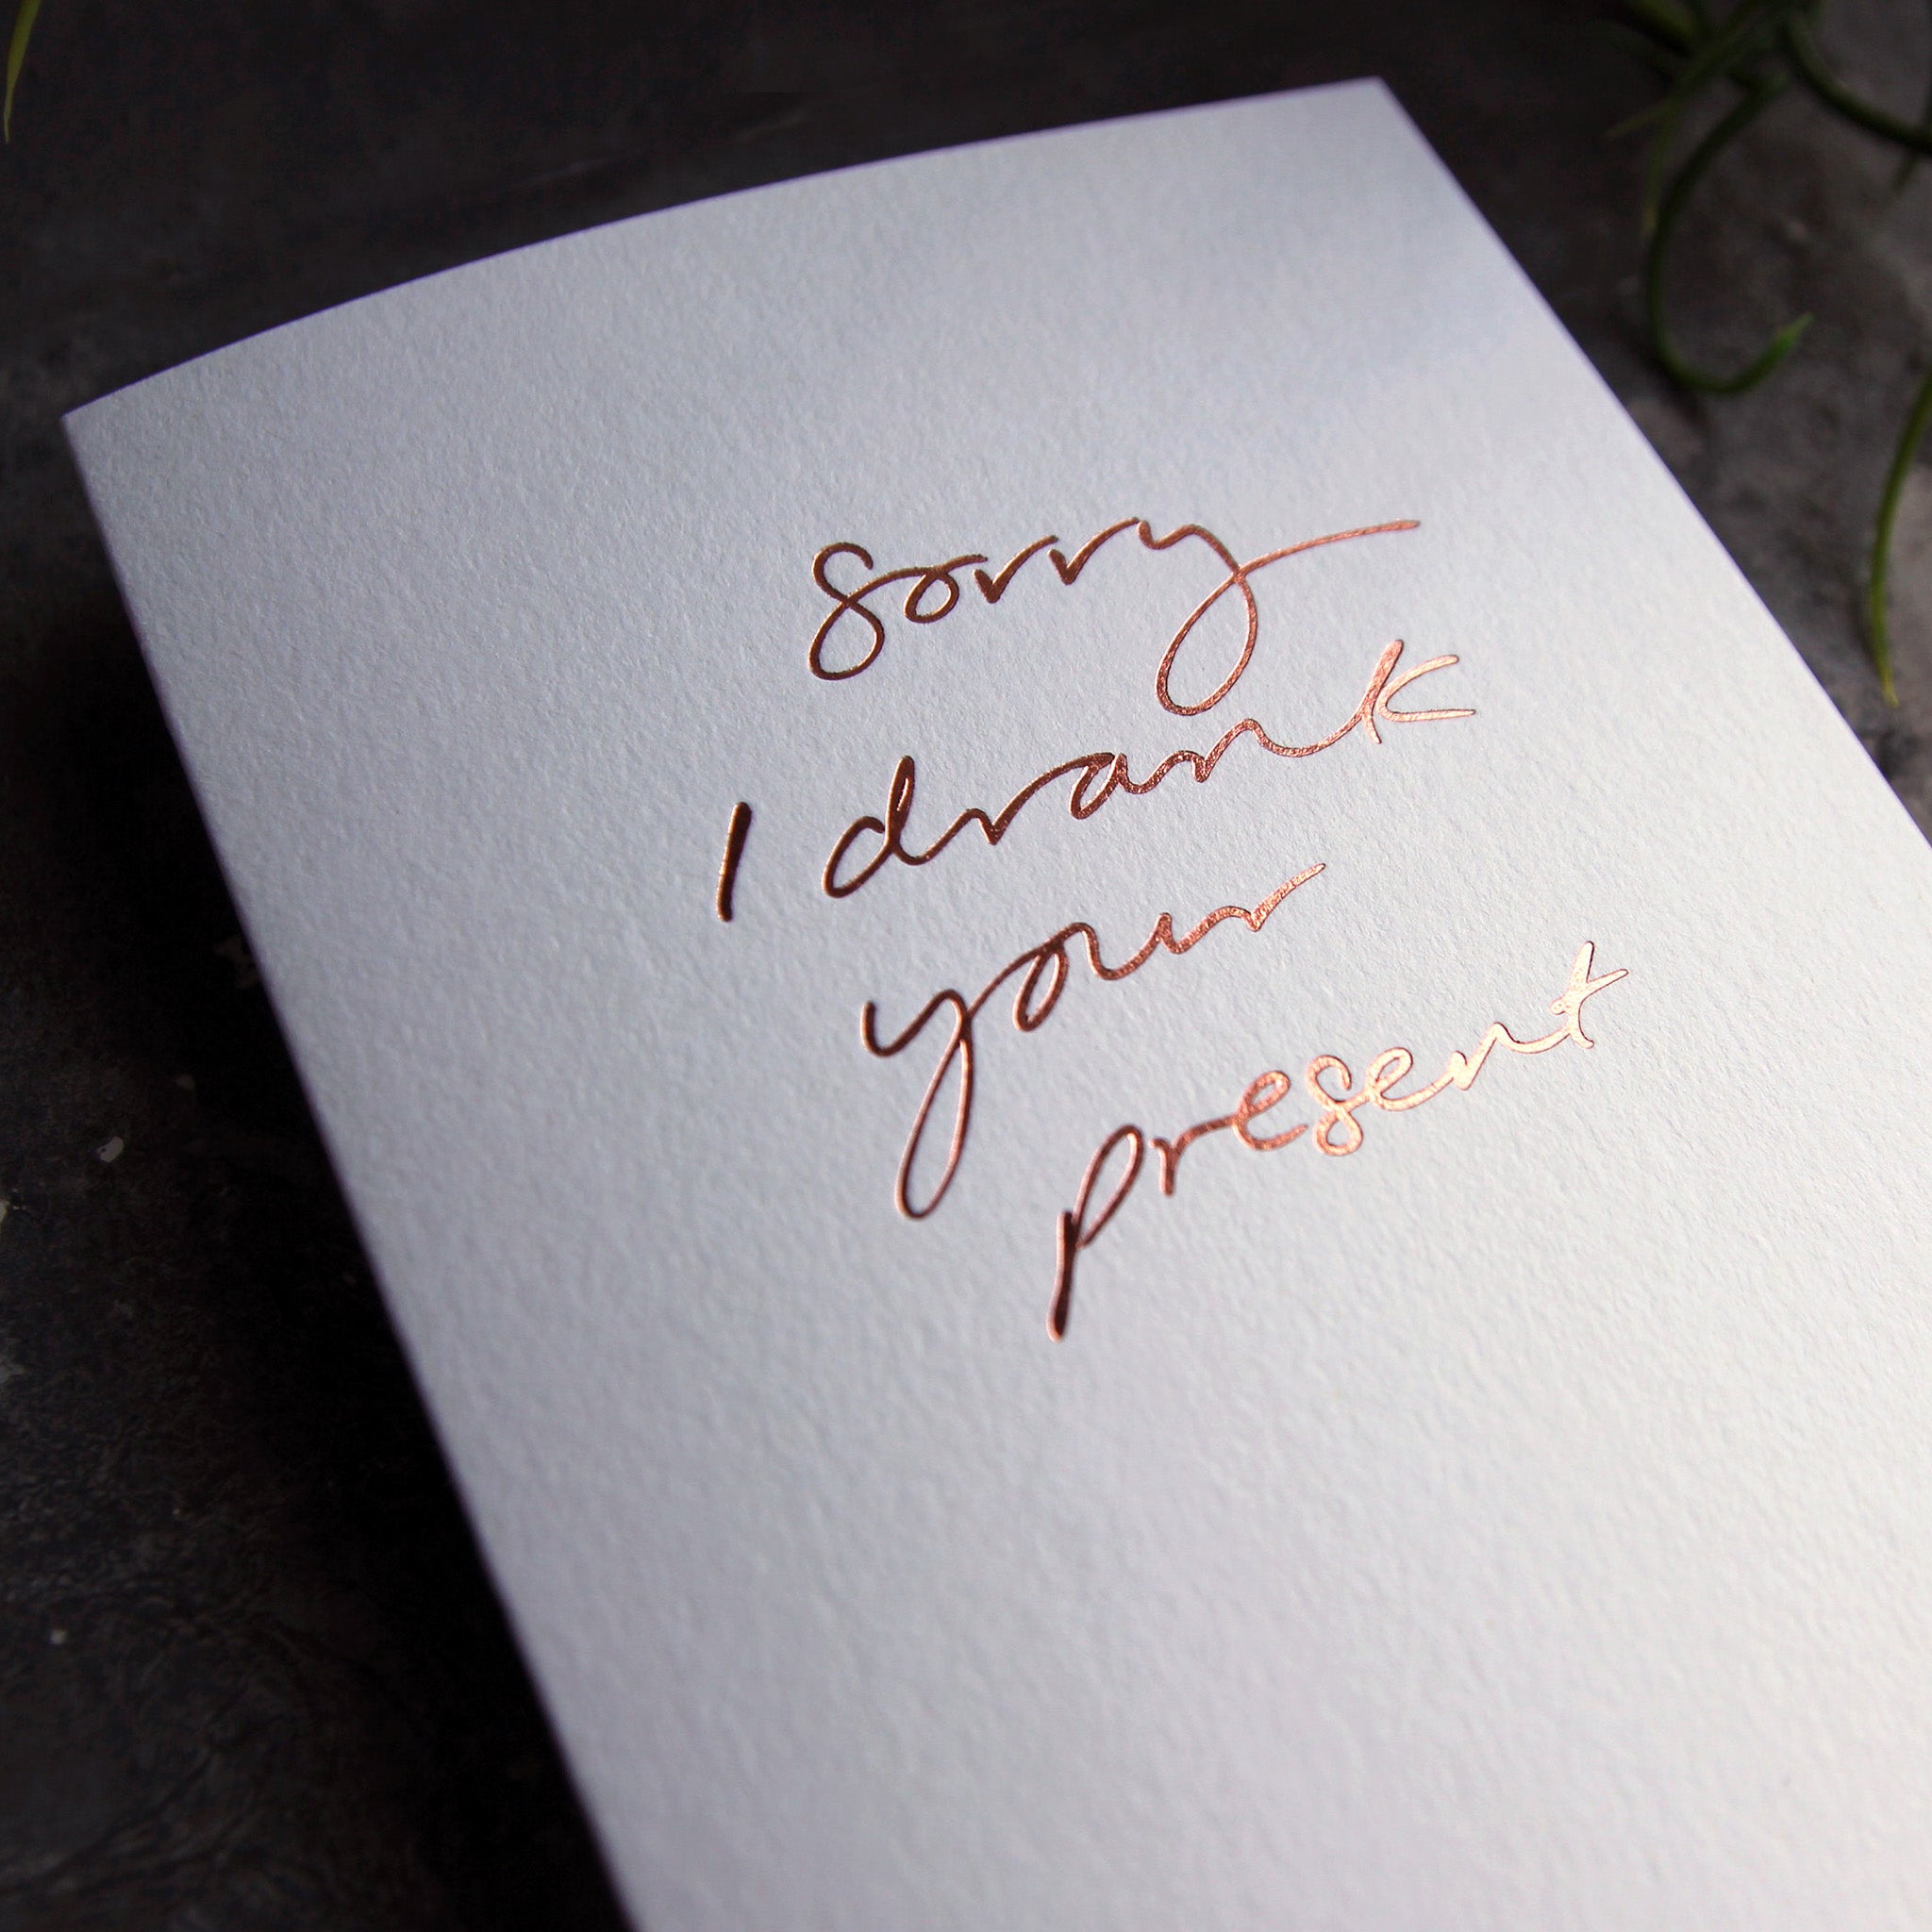 Close up of luxury white greetings card with "Sorry I Drank Your Present" handwritten in the front and hand printed in rose gold foil on a grey background with some green plant leaves at the side.